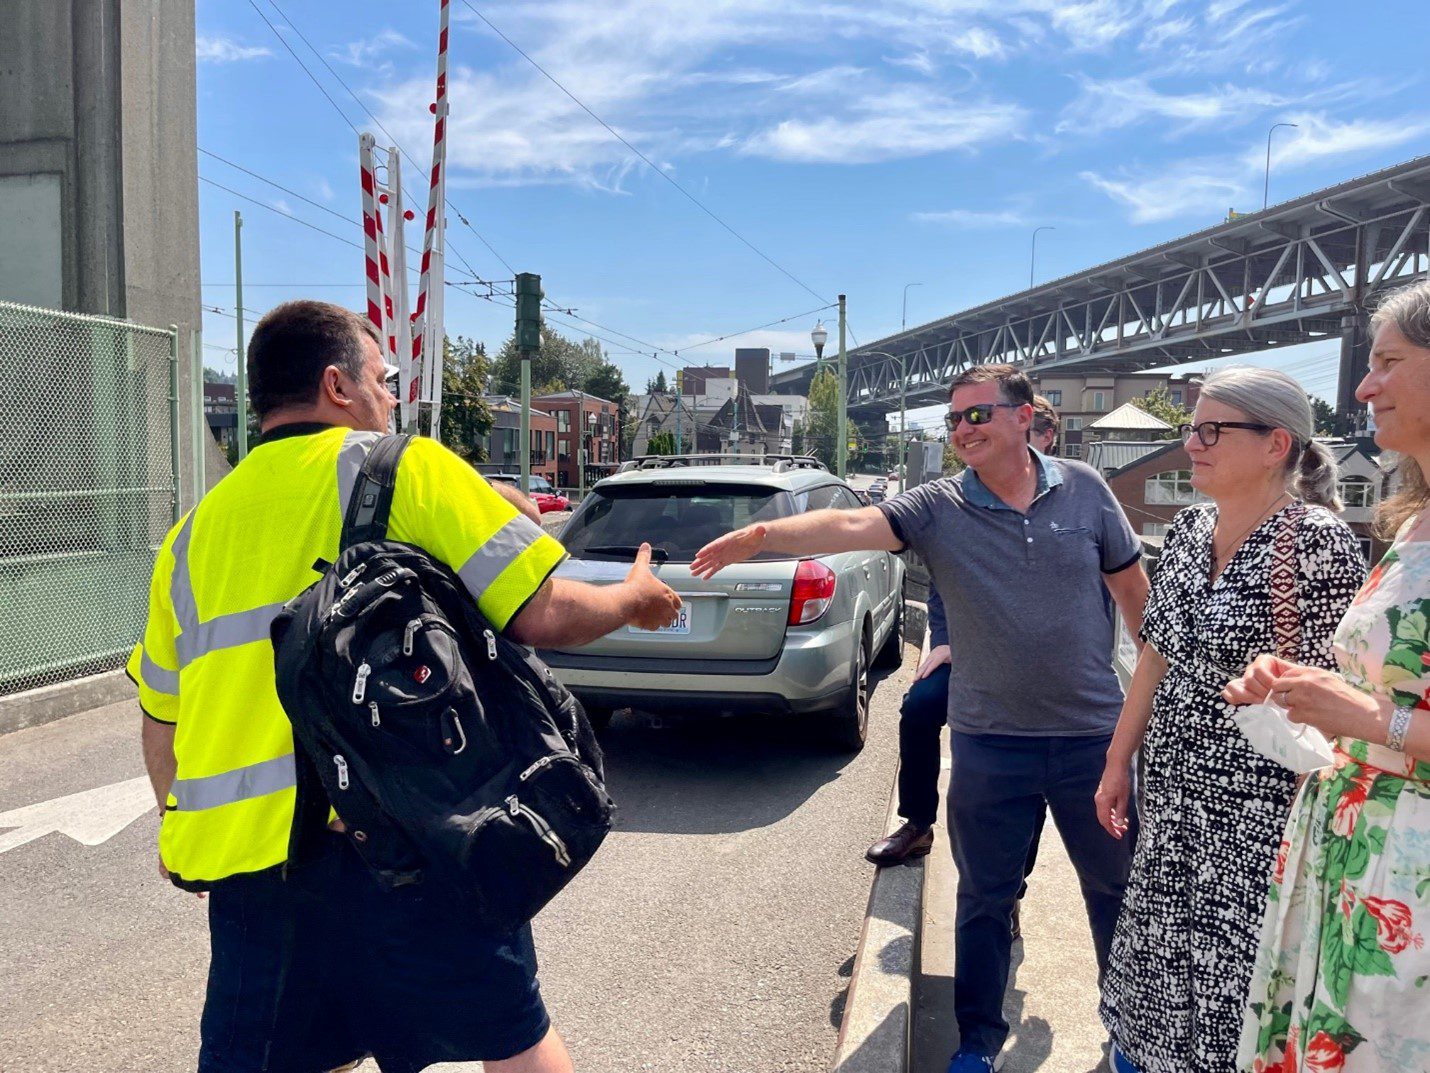 Greg Spotts shakes hands with SDOT team member Jared Hickman while touring the University Bridge in Seattle on a sunny day. A car and the Ship Canal Bridge are in the background.